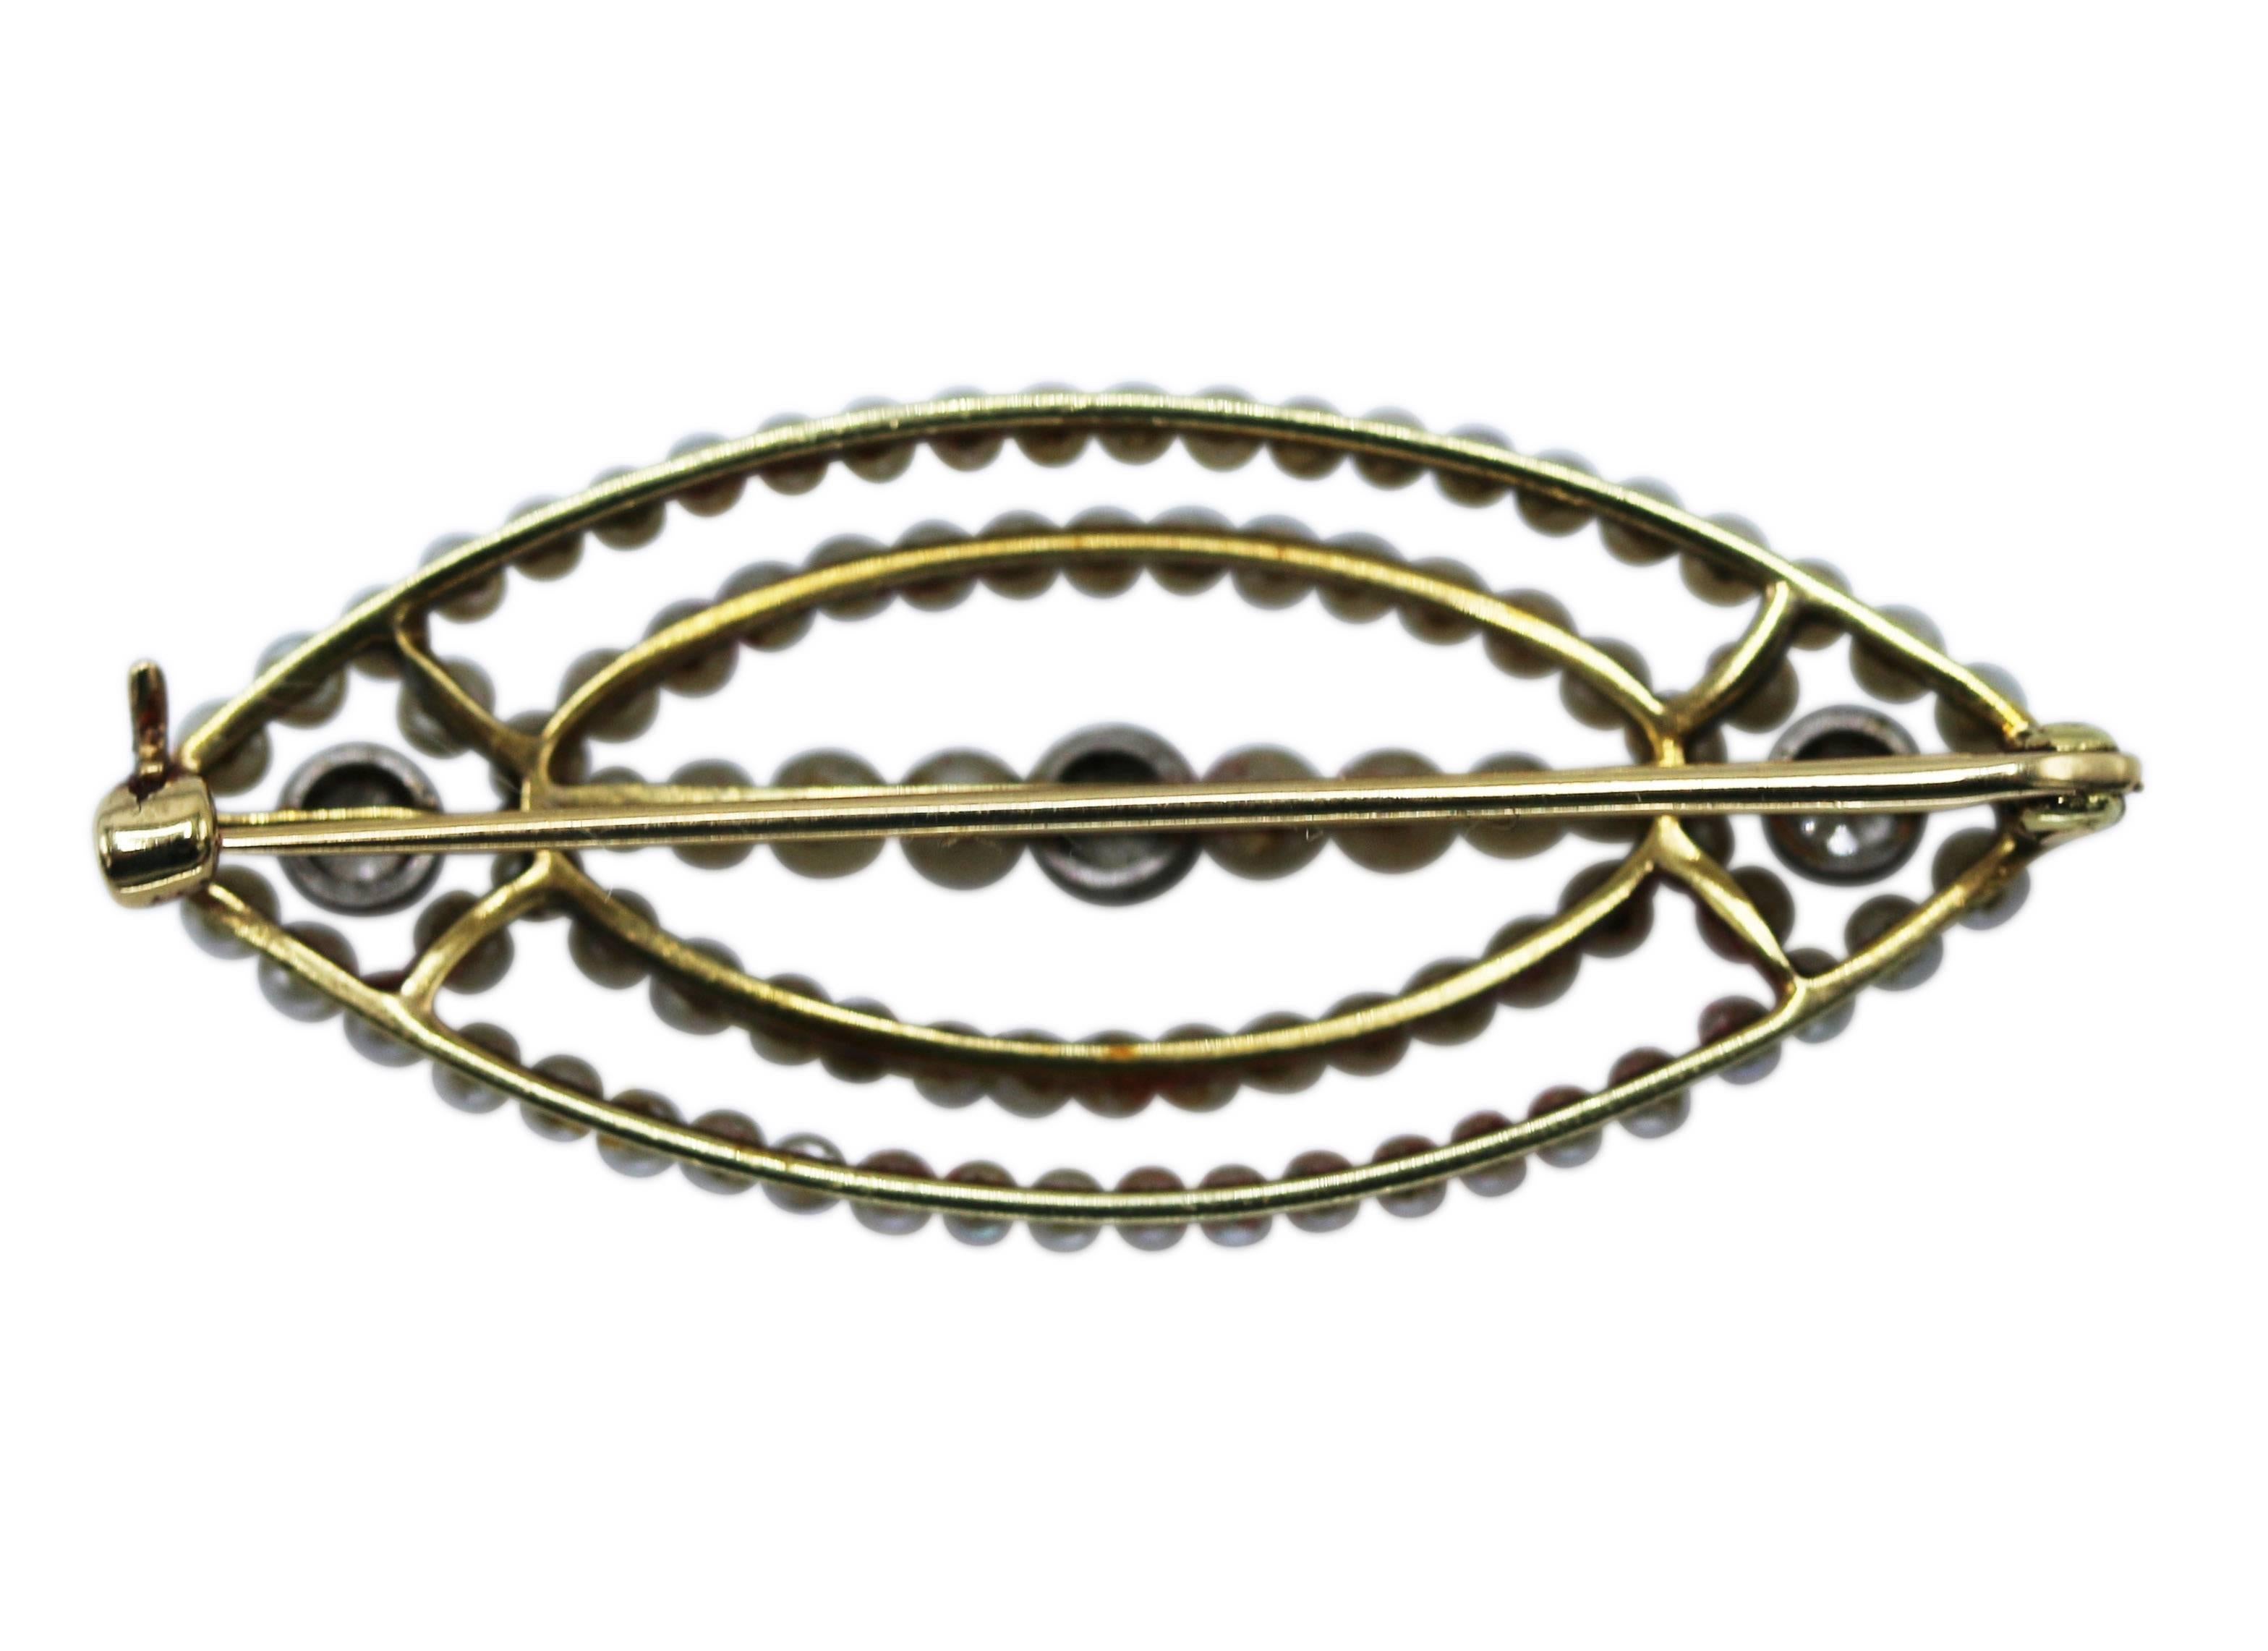 Early 20th Century gold, platinum, seed pearl and diamond brooch, the modified lozenge-shaped brooch of openwork design composed of lines of seed pearls measuring 1.8 to 2.5 mm., accented by old European-cut diamonds weighing approximately 0.15